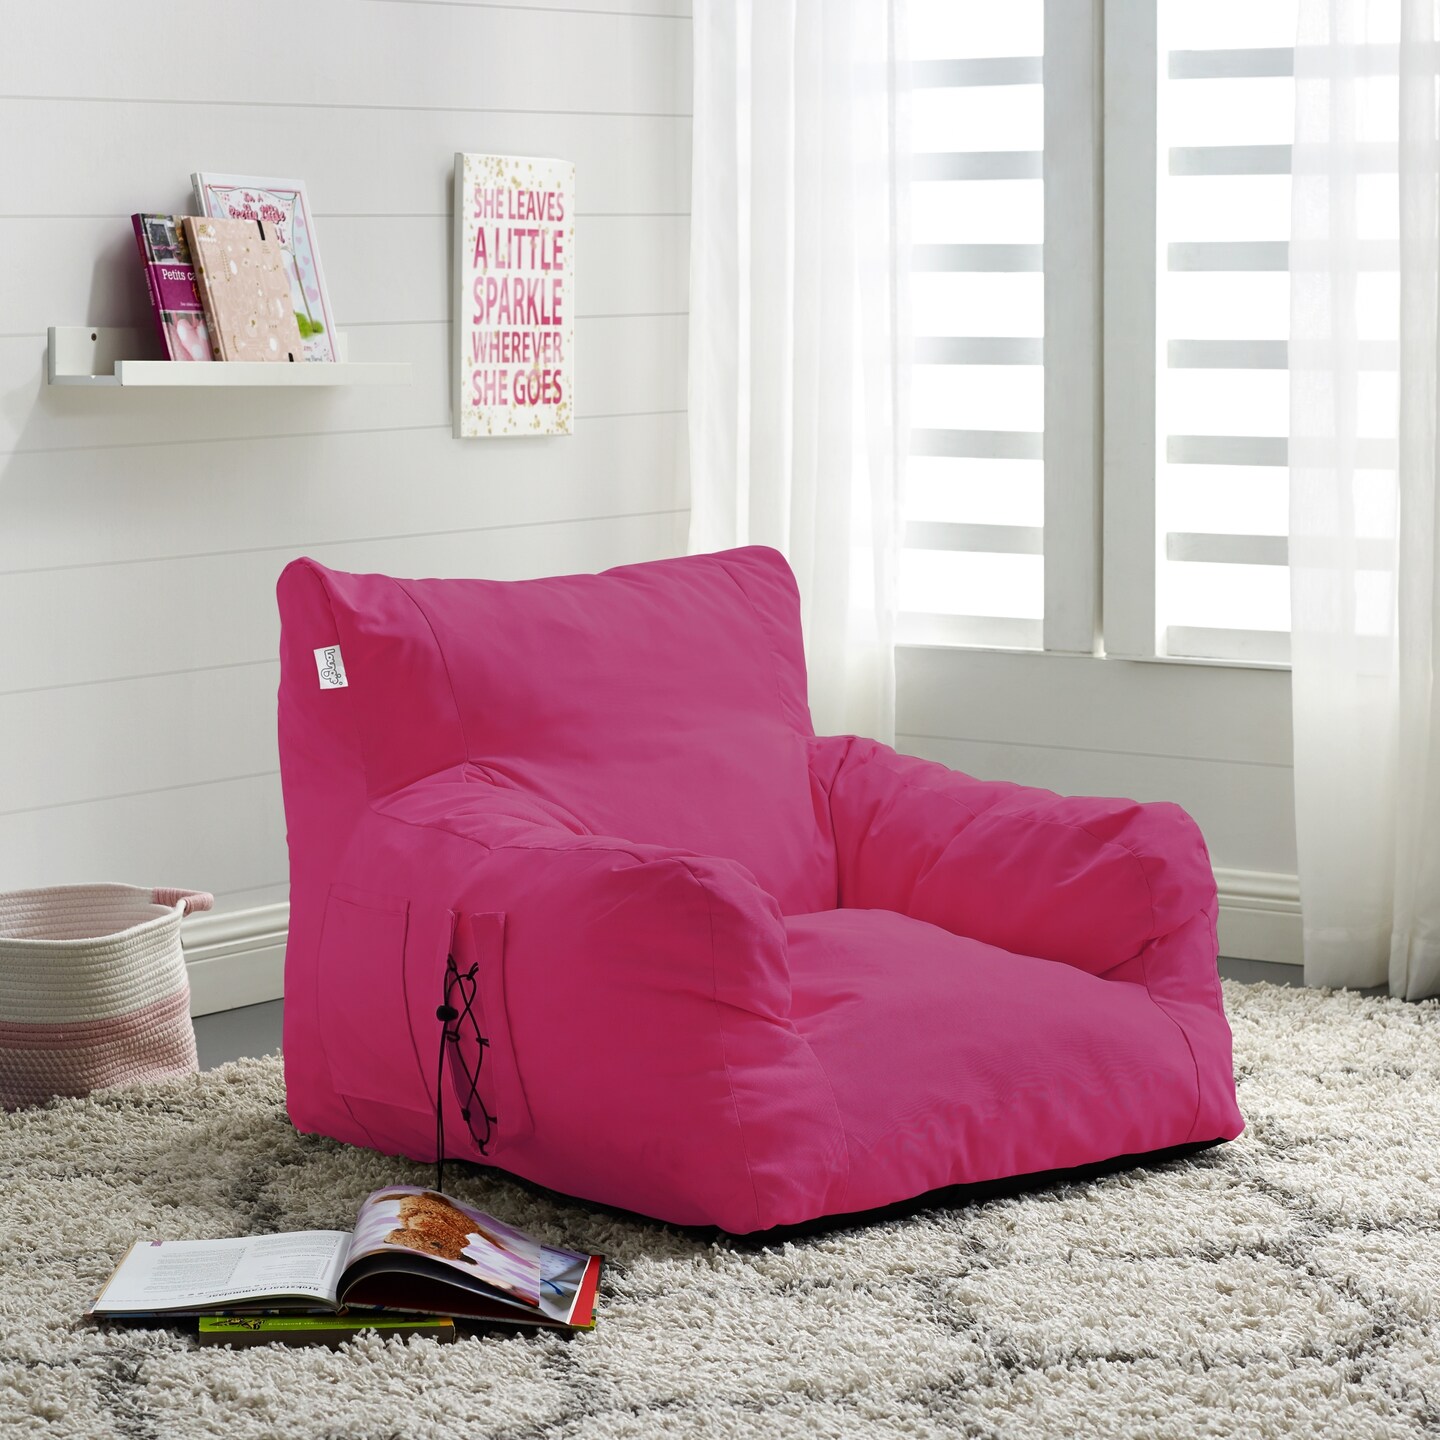 Cane-line Cozy bean bag chair - see selection – Cane-line.net